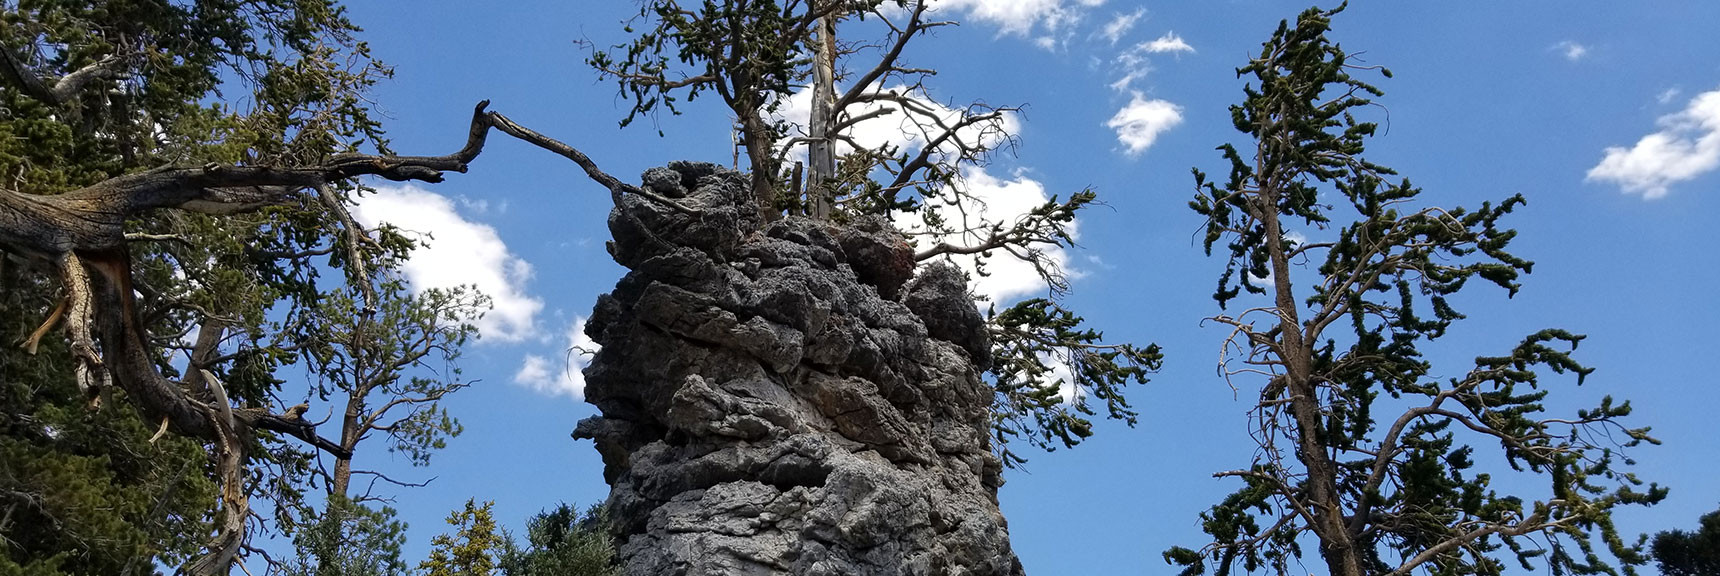 One of the Stone Pillars Near the Arch | Black Rock Sister | Mt Charleston Wilderness | Lee Canyon | Spring Mountains, Nevada